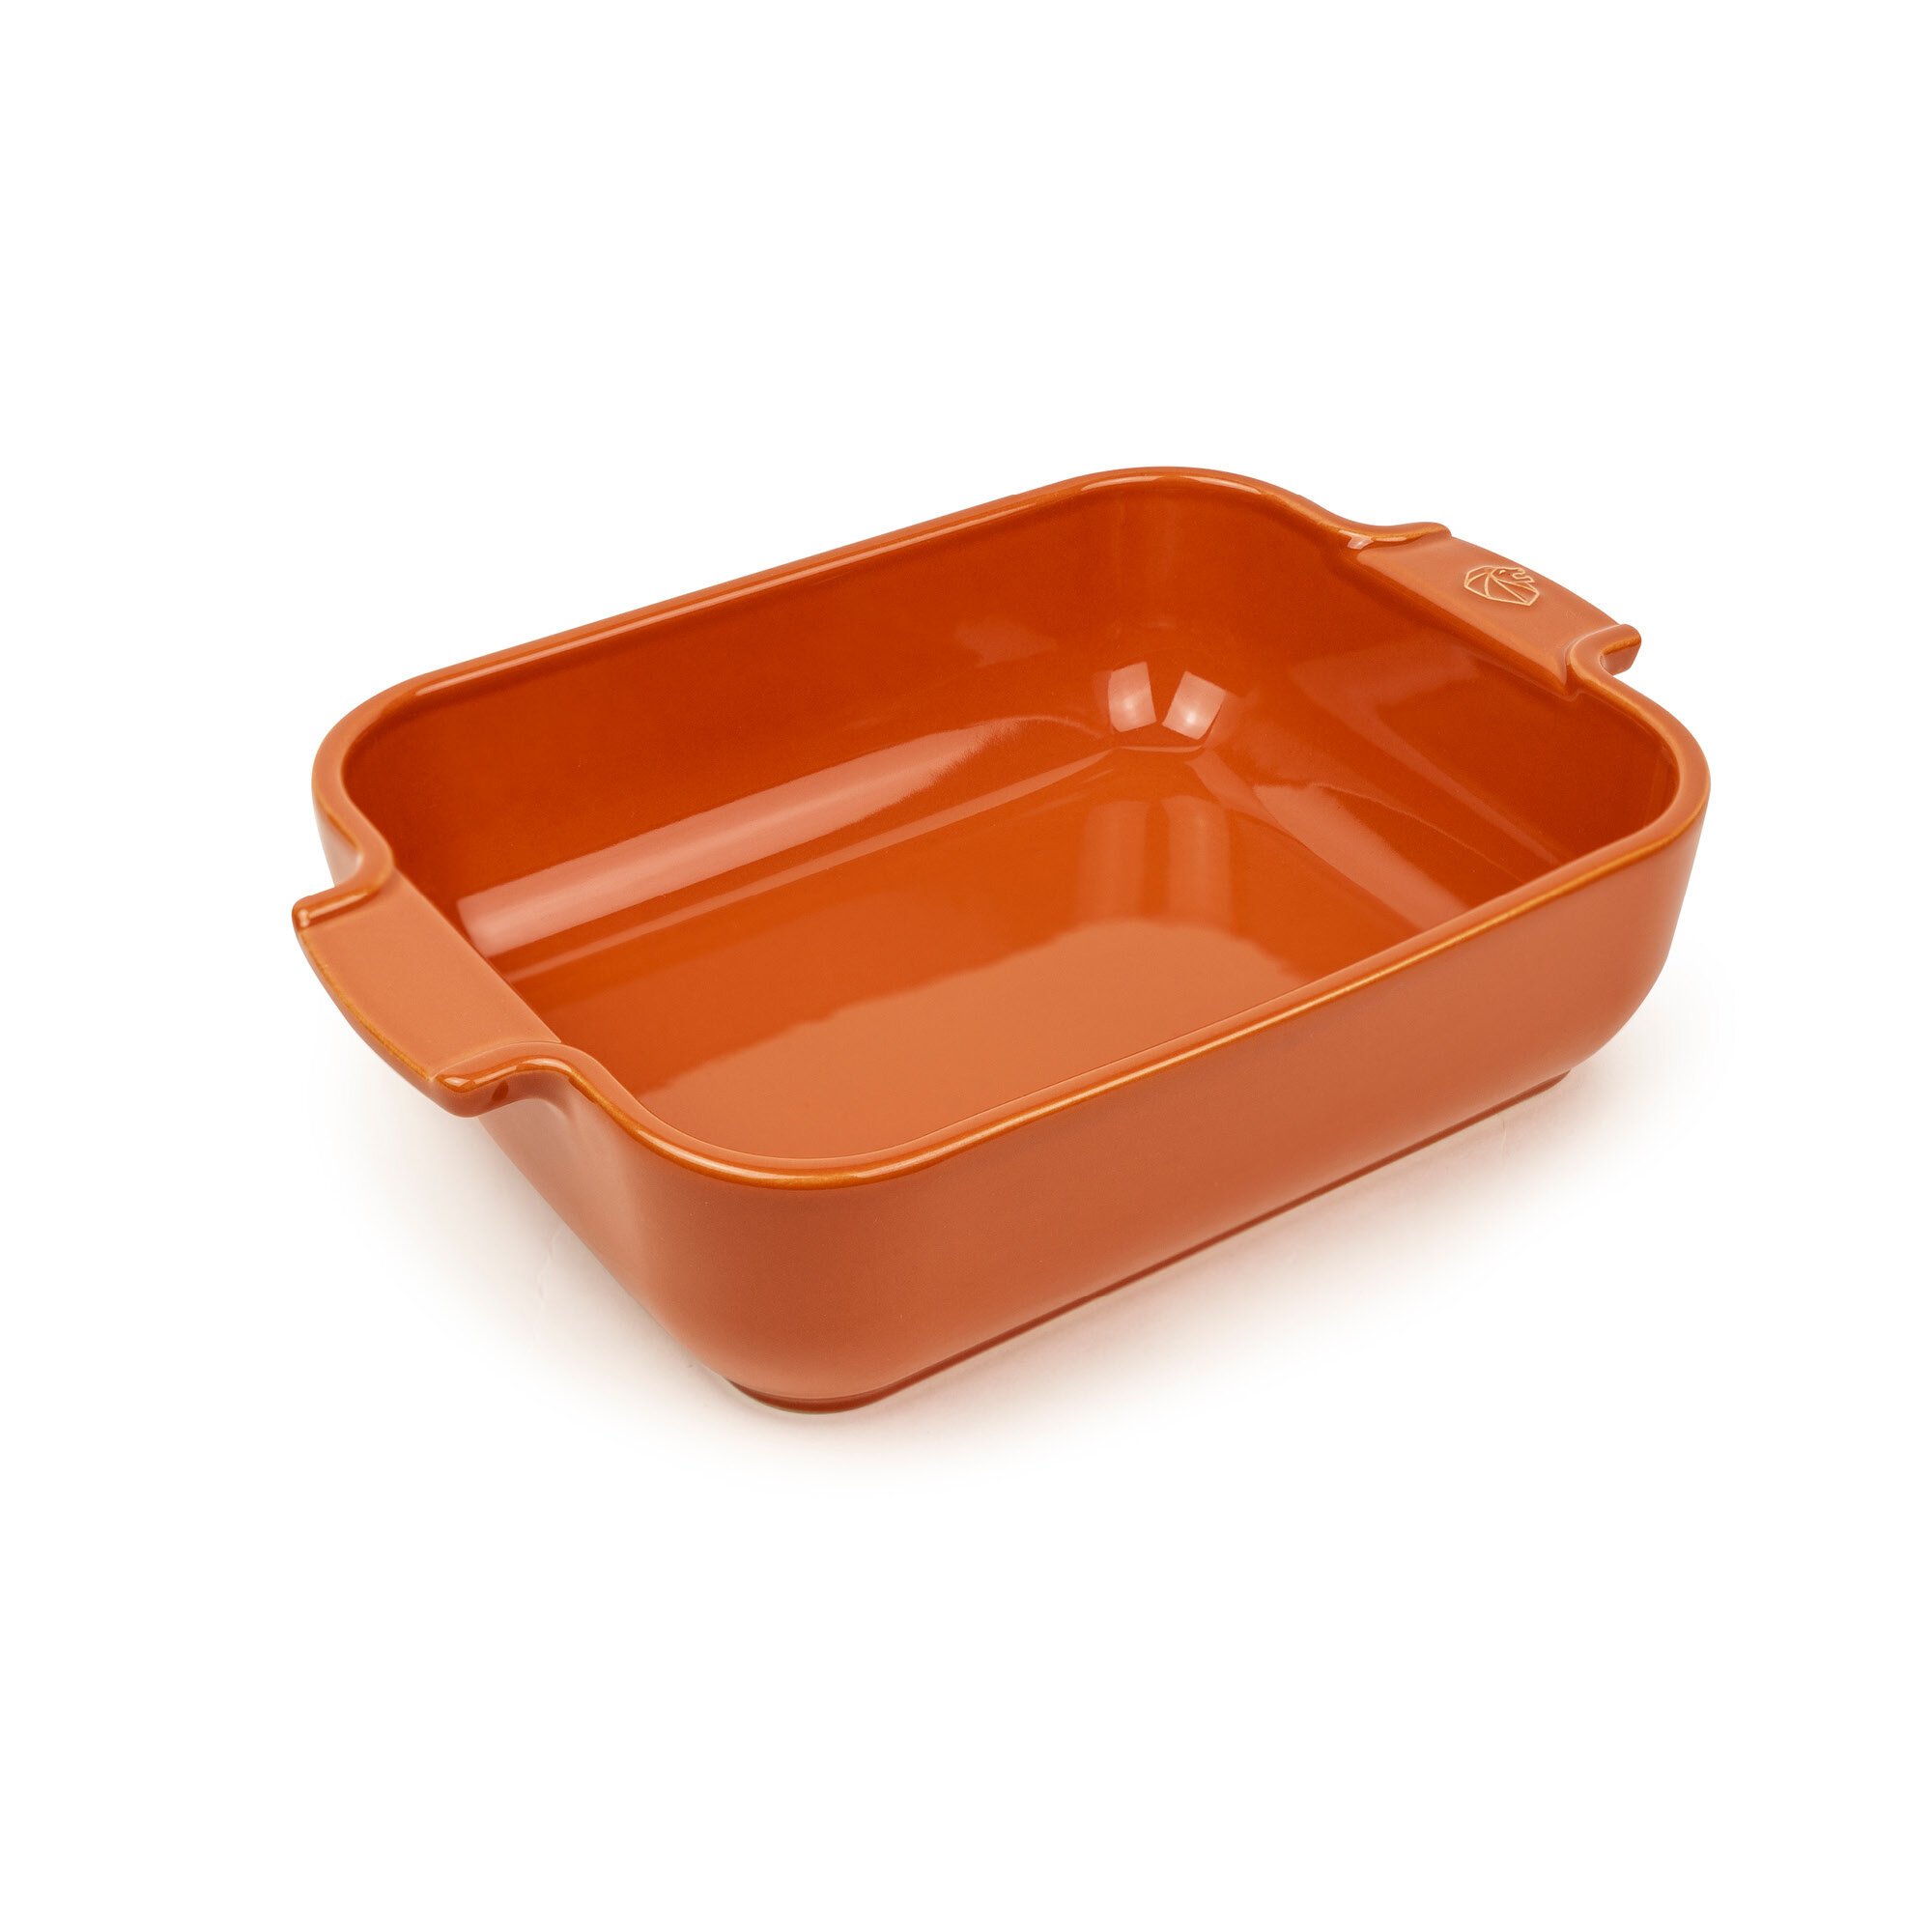 Clever Cooking square baking dish 21 x 21 cm Villeroy & Boch